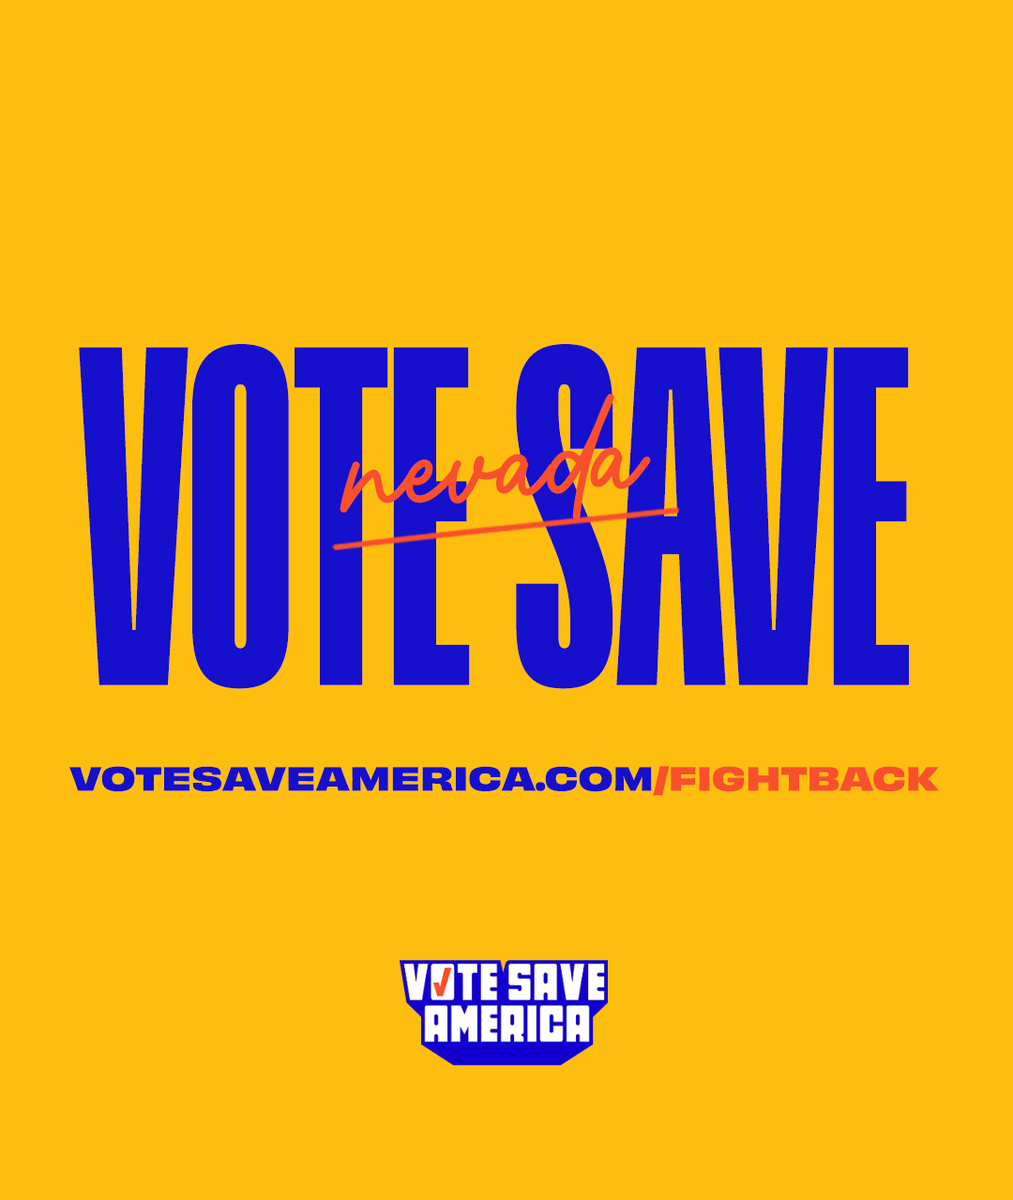 Abortion rights groups in Nevada are now one step closer to getting an abortion measure on the ballot! Go to VoteSaveAmerica.com/fightback to help them get it over the finish line!